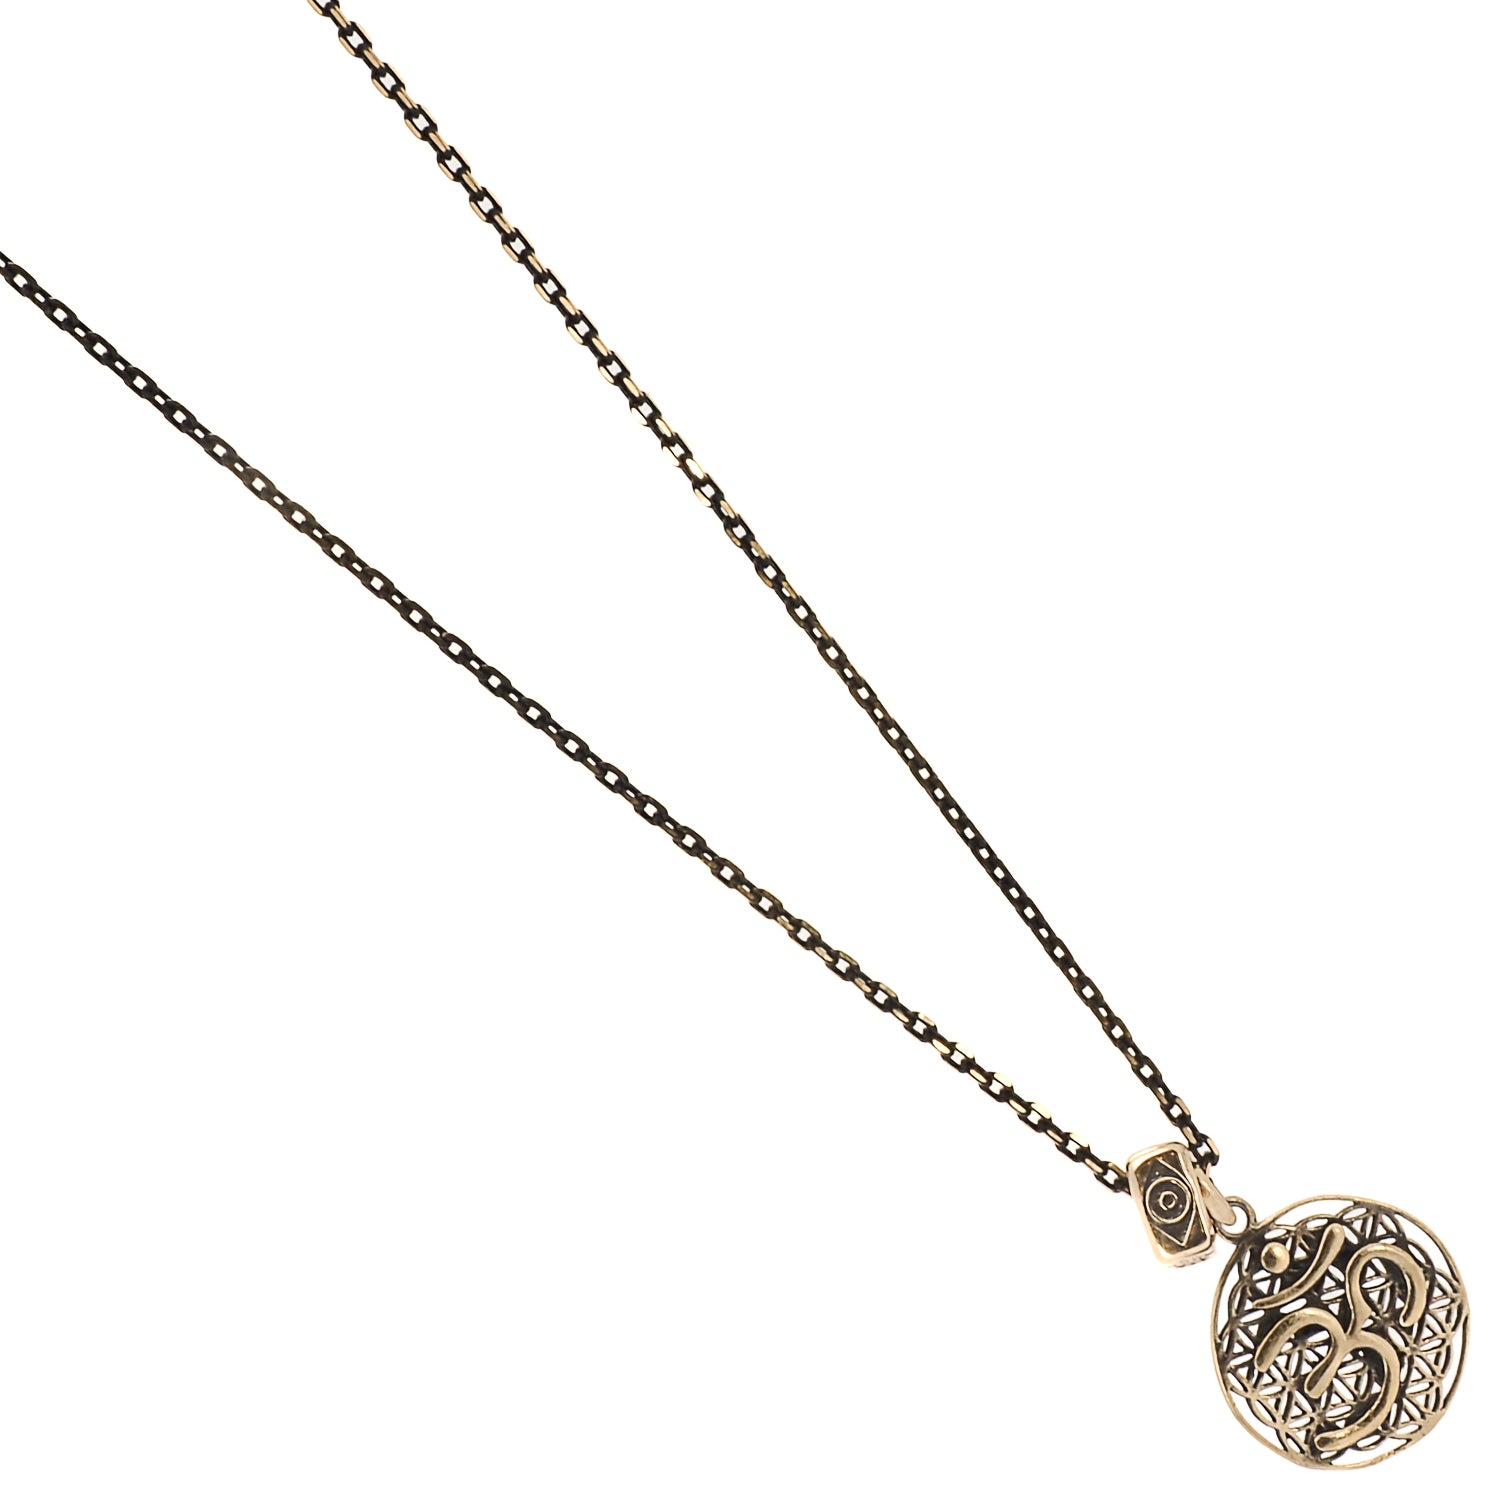 A detailed shot of the Spiritual Symbols Om Necklace, highlighting the symbolic bead with the evil eye, hamsa, and elephant motifs.